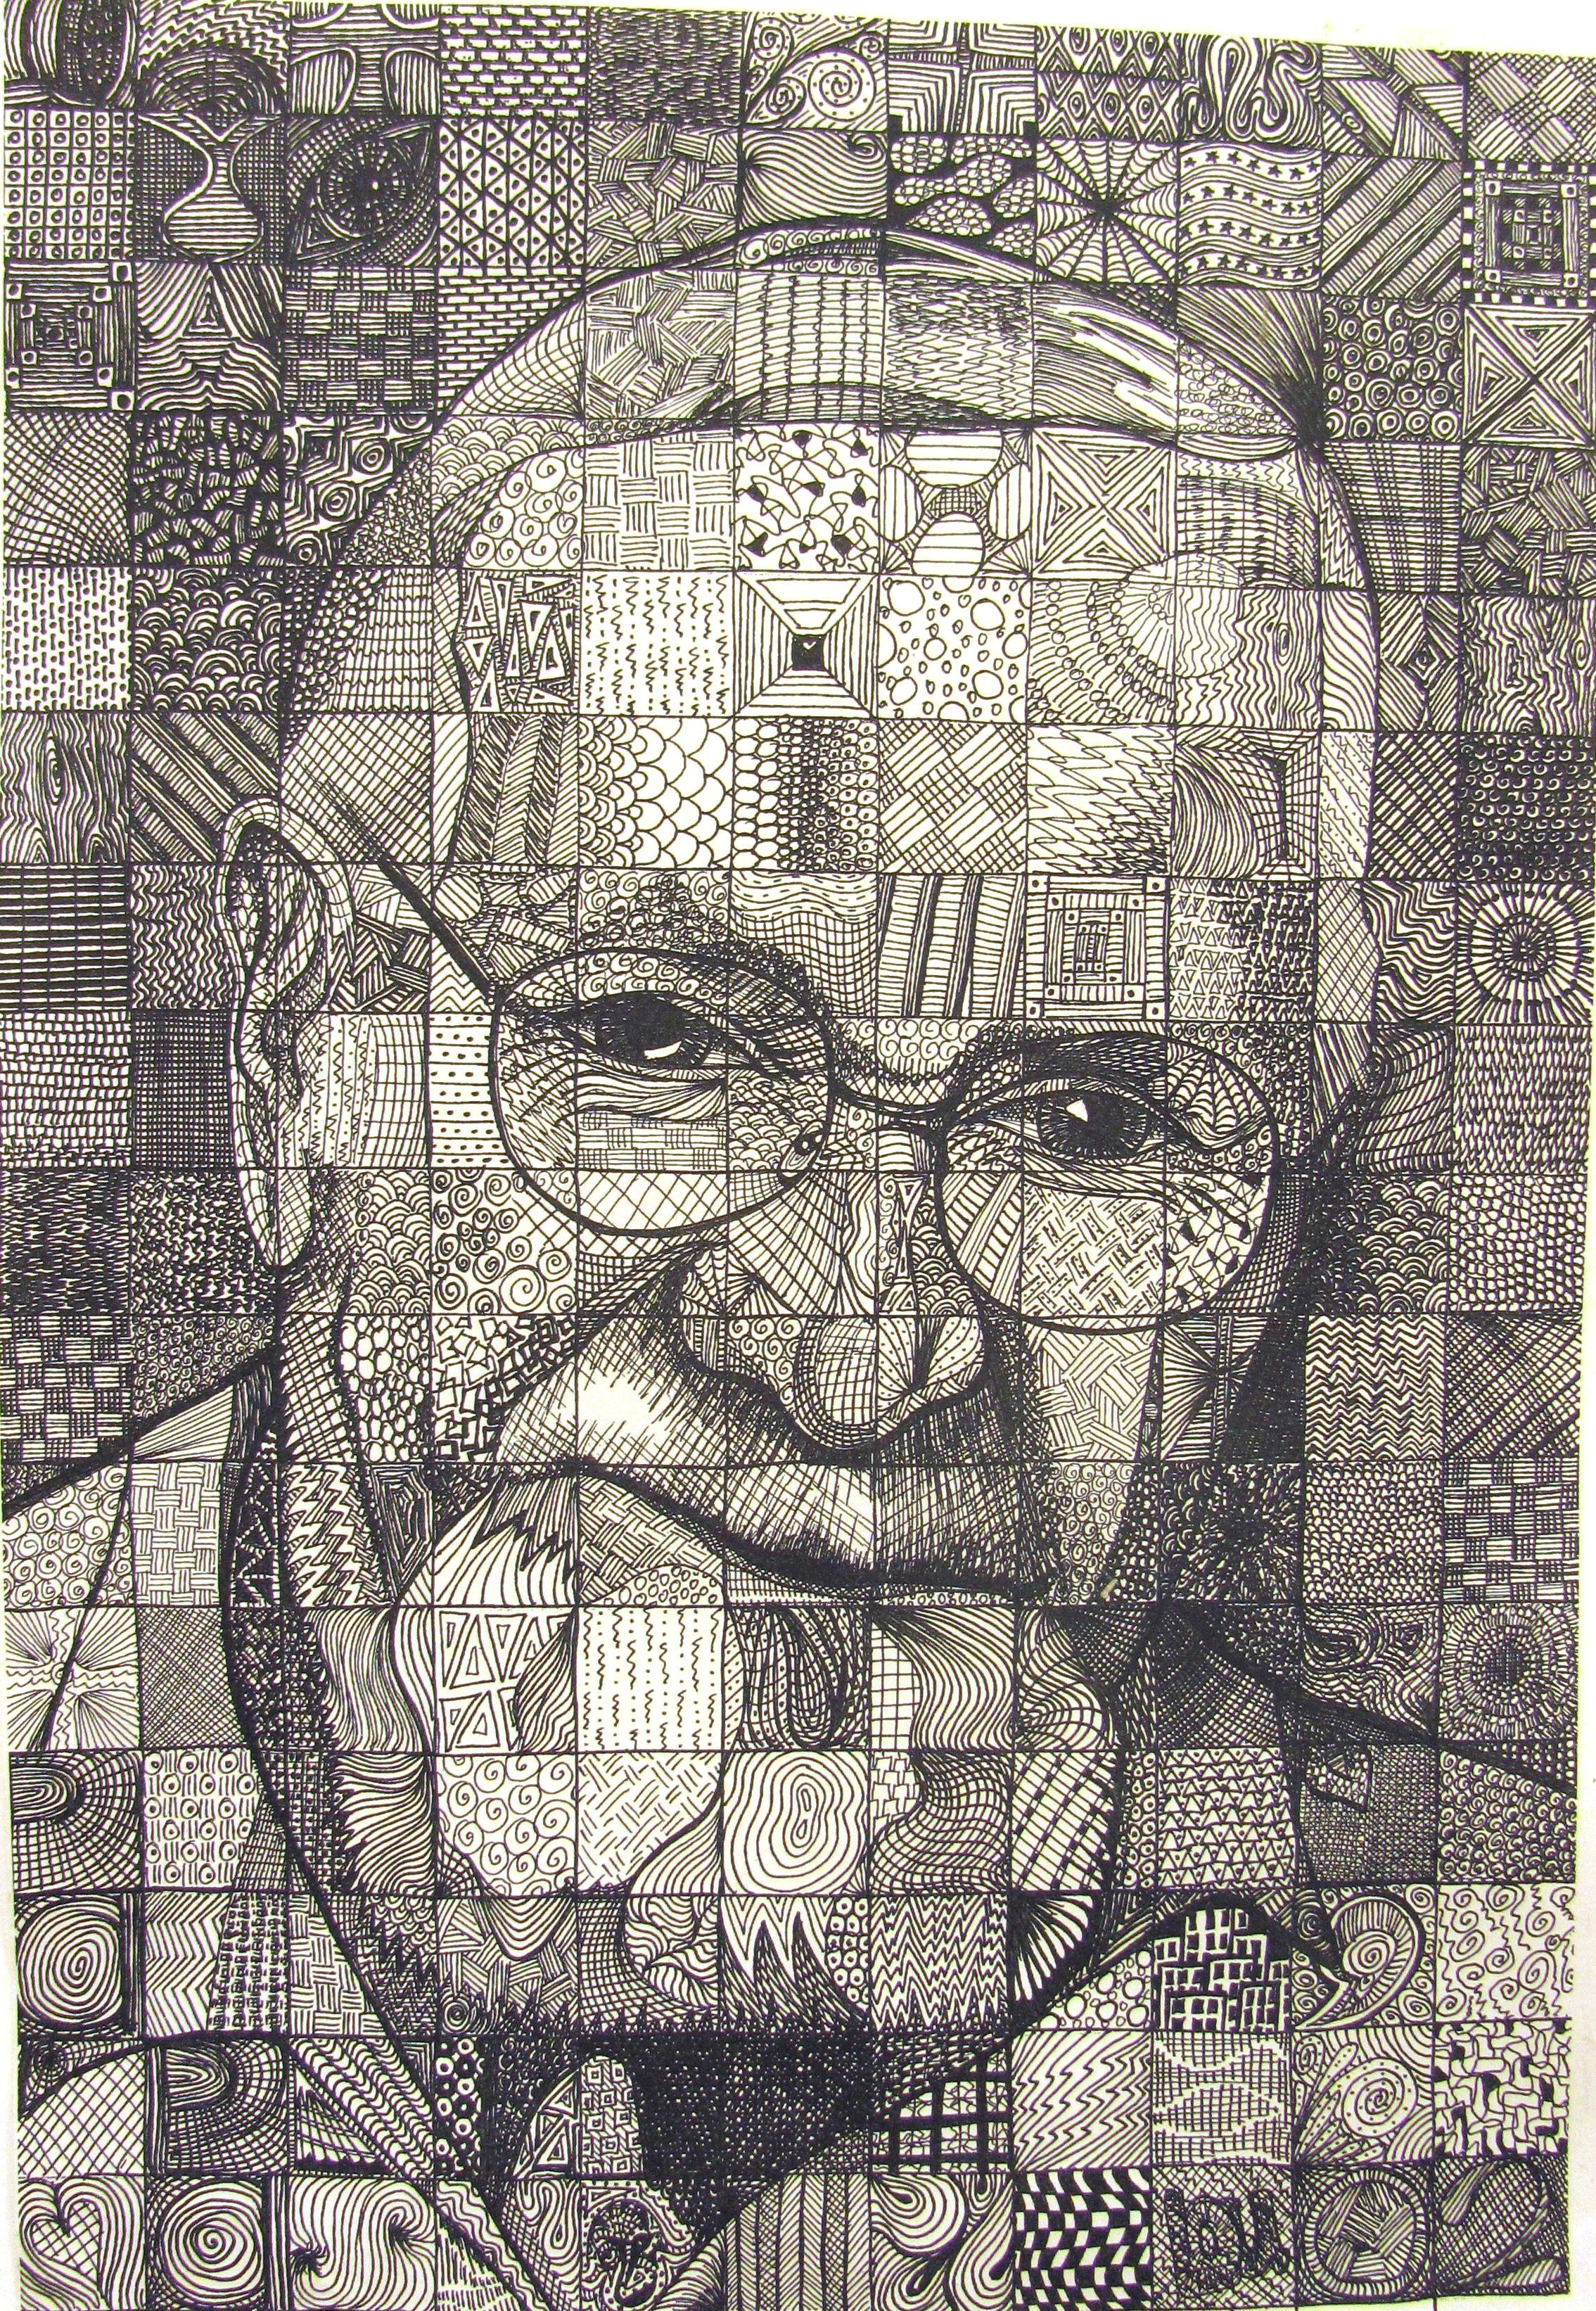 Drawing Using A Grid Papa bylou Traylor Example Of Grid Drawing Using Pattern for Value